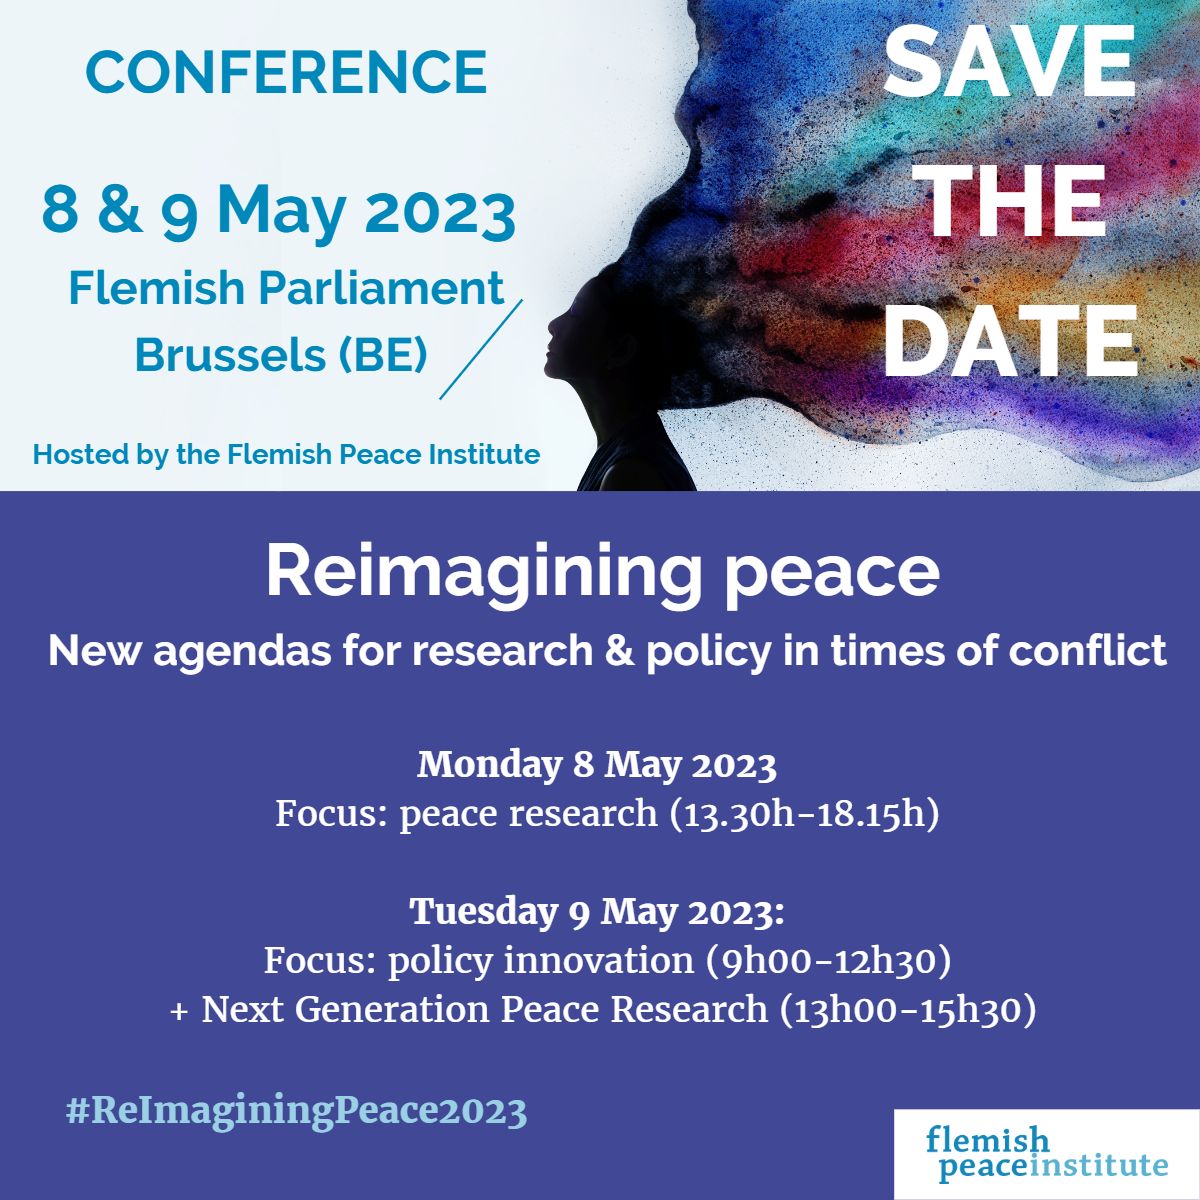 Conference - Reimagining peace: New agendas for research & policy in times of conflict